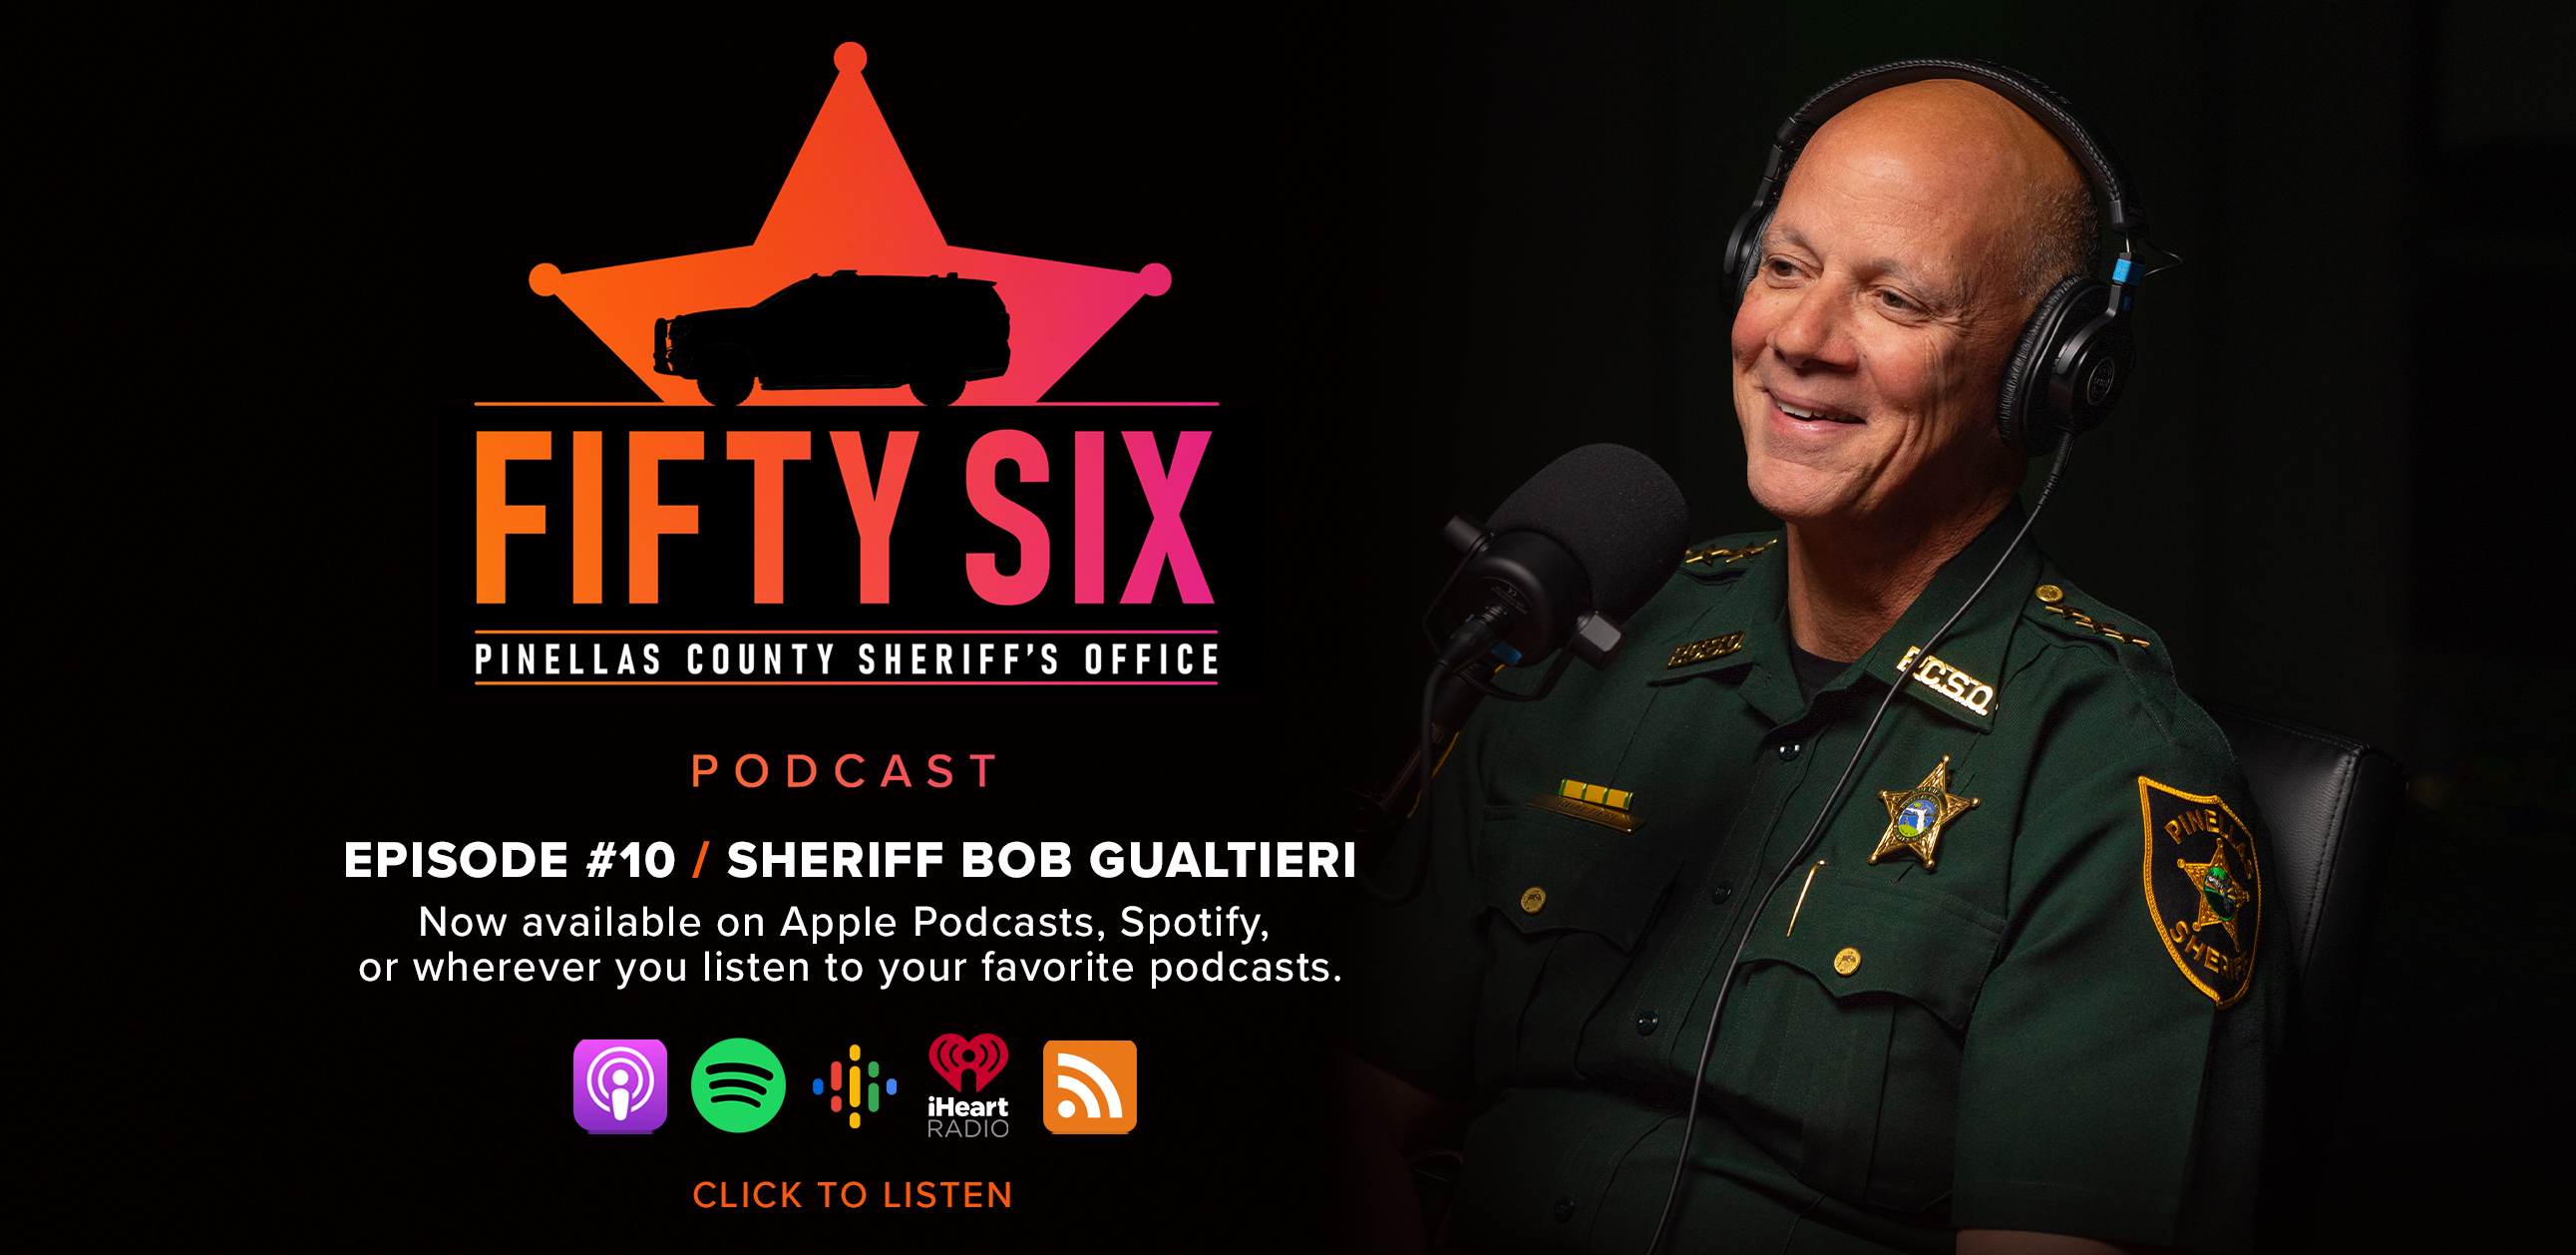 56 Podcast, Episode 10 Sheriff Bob Gualtieri, now available wherever you listen to your favorite podcasts.